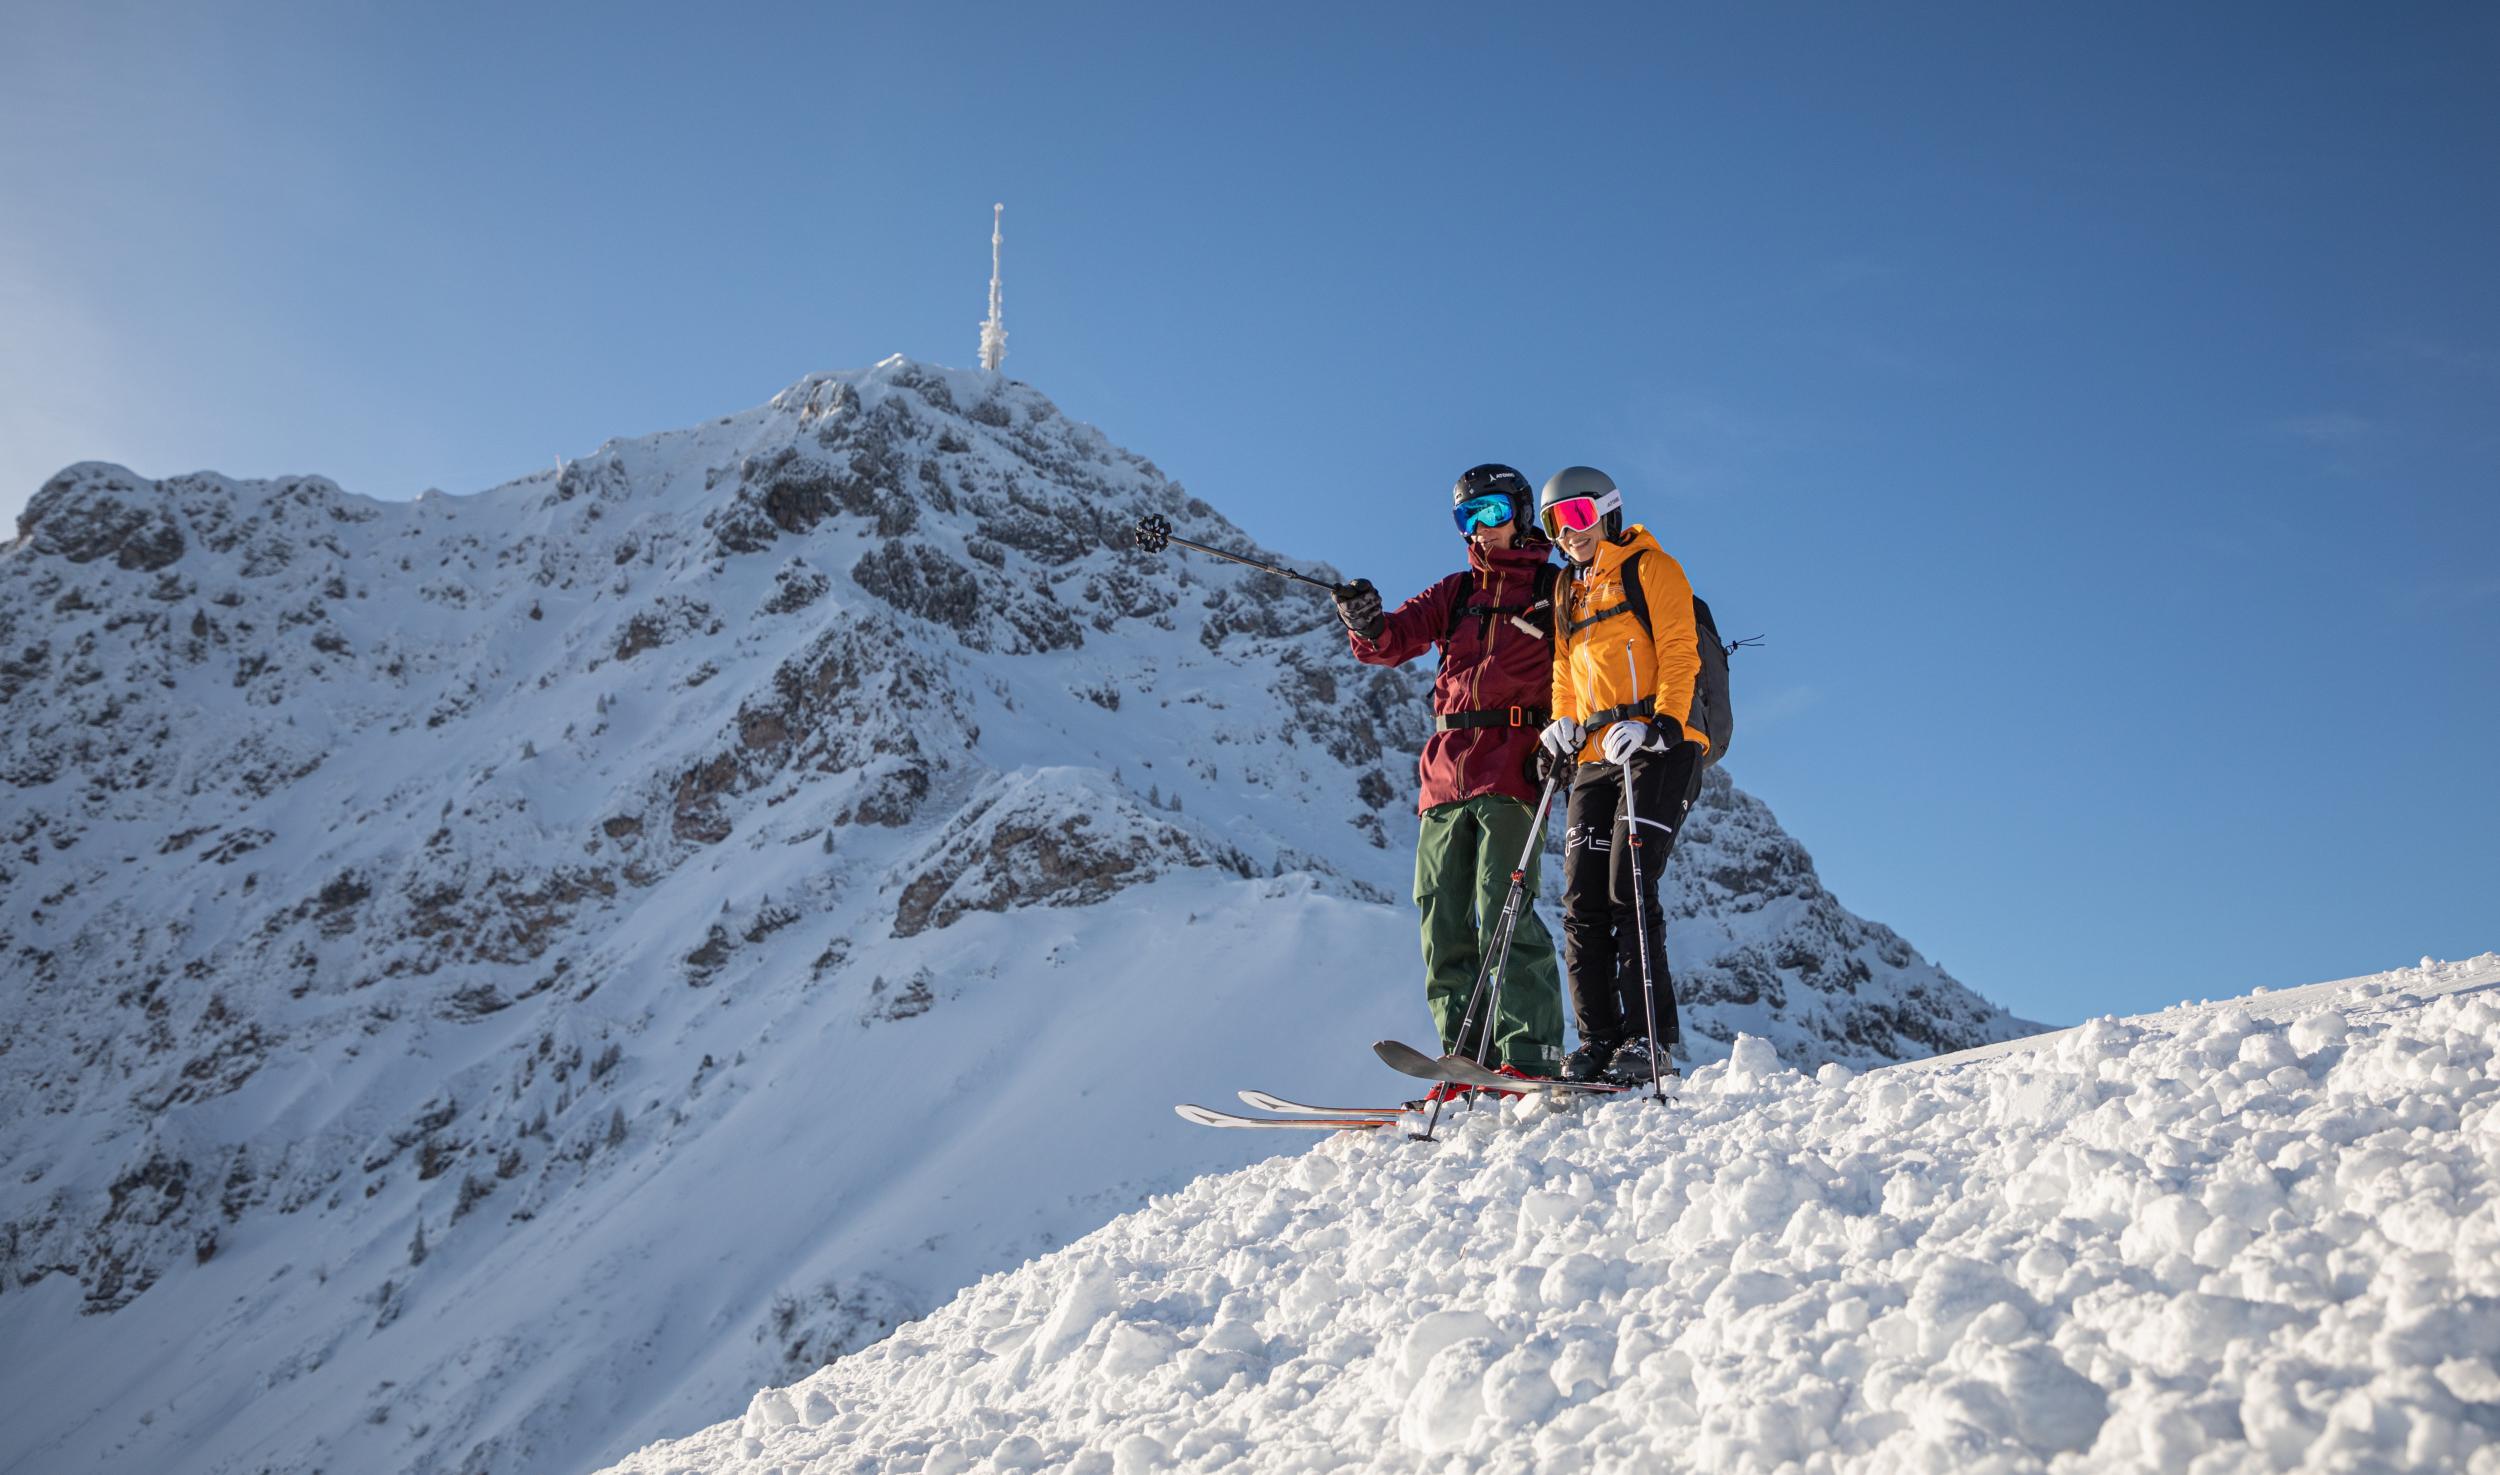 The mighty Kitzbüheler Horn is just one of many skiing destinations in the region